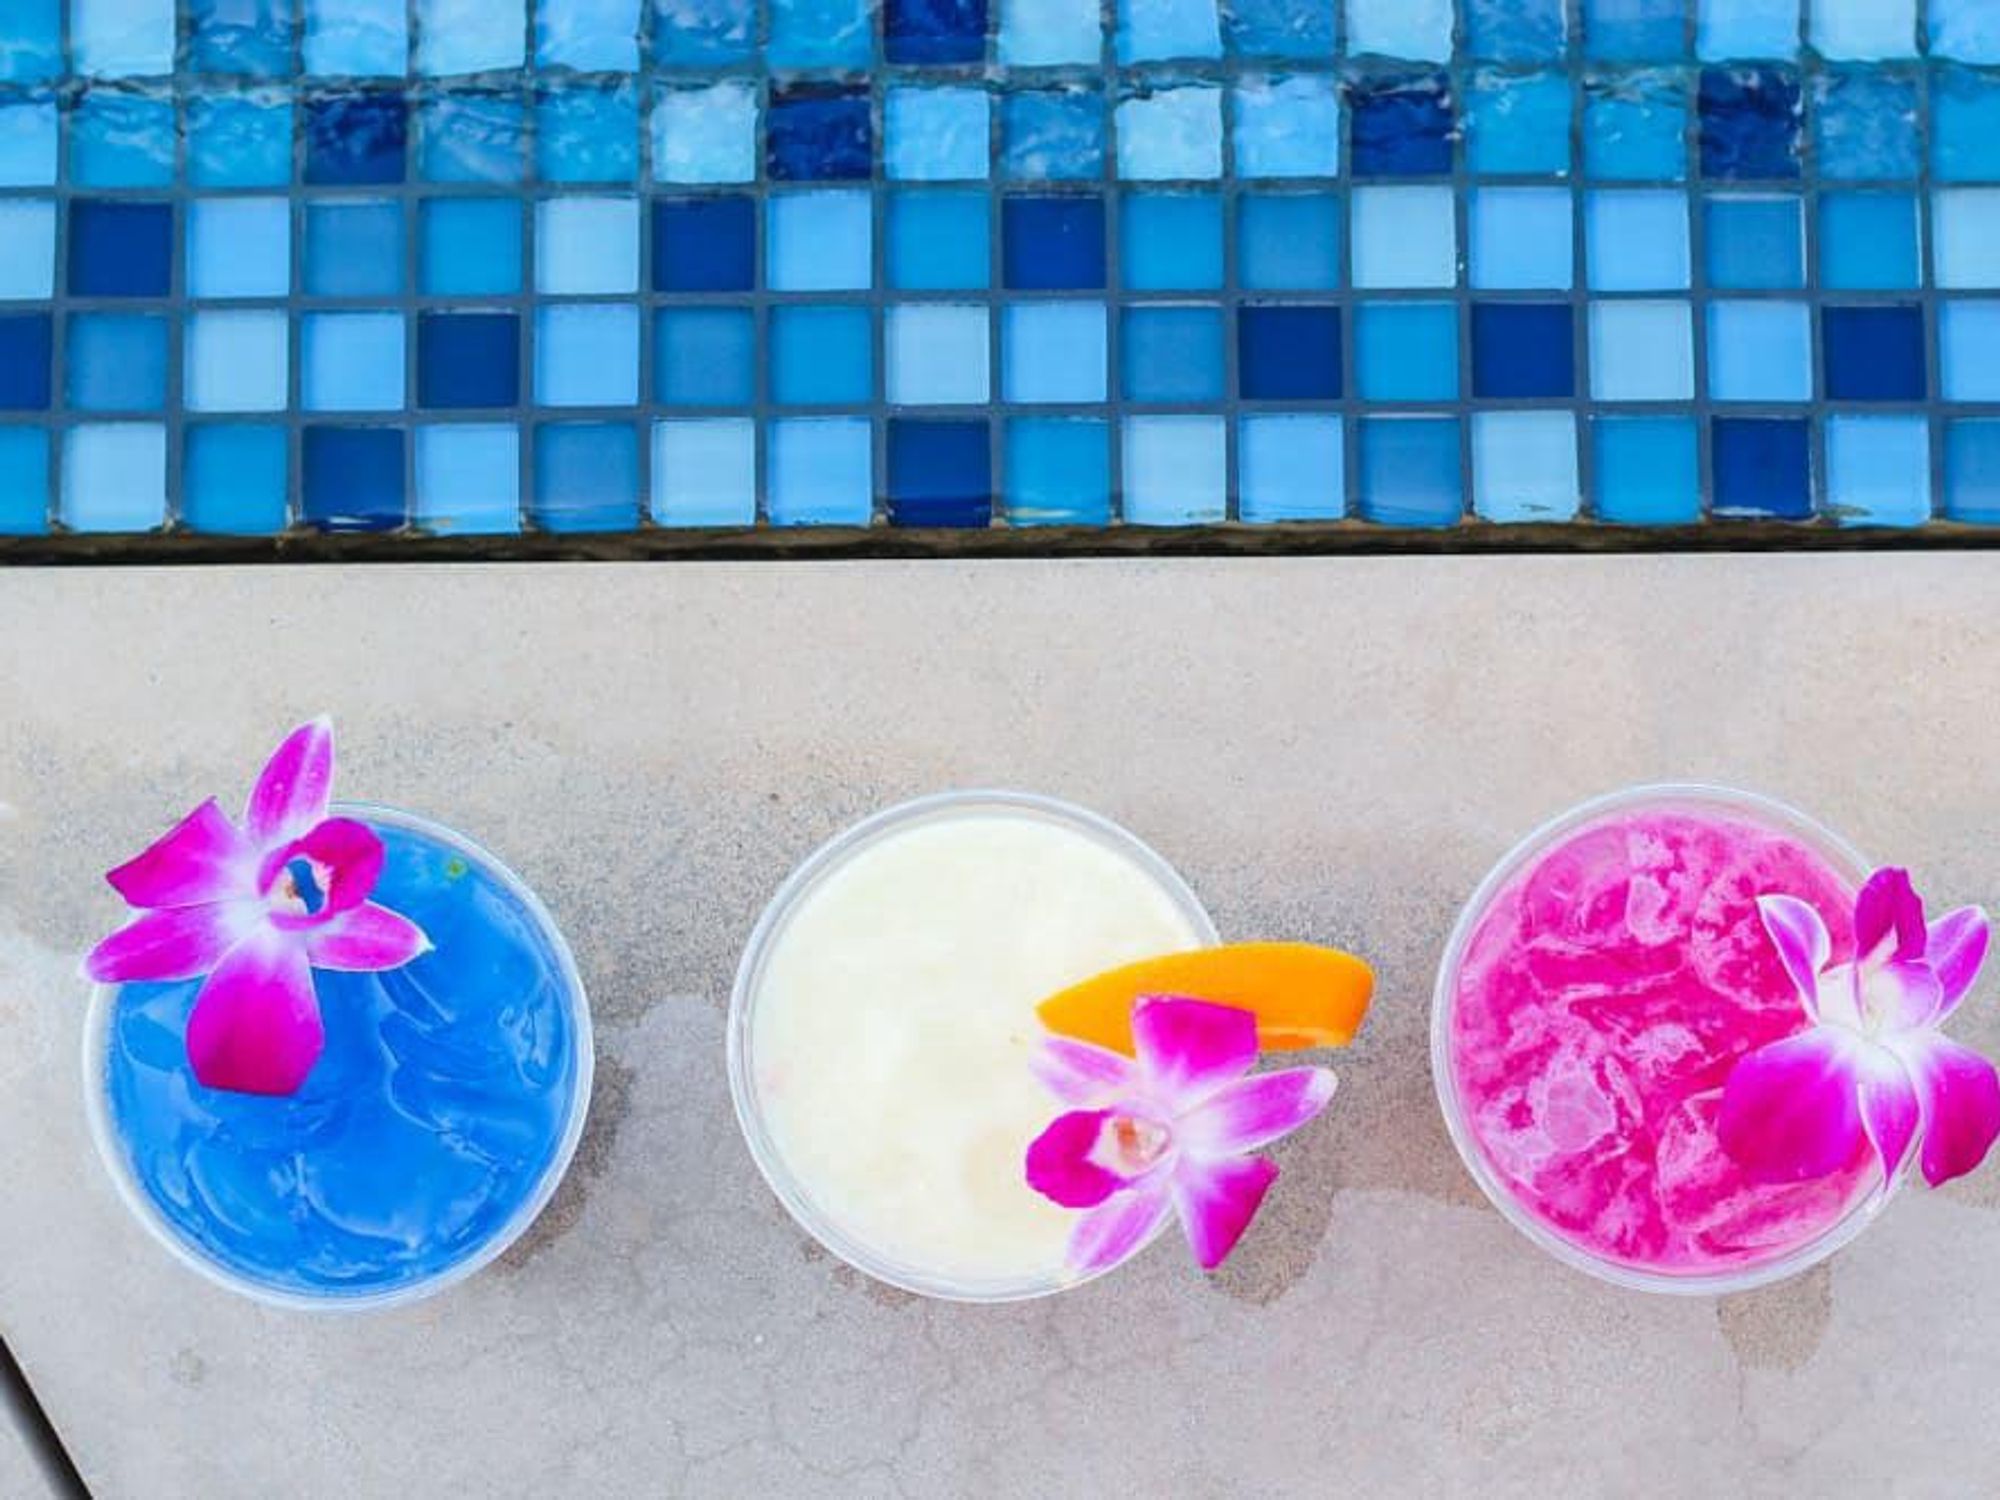 The new summer cocktails are a work of art.